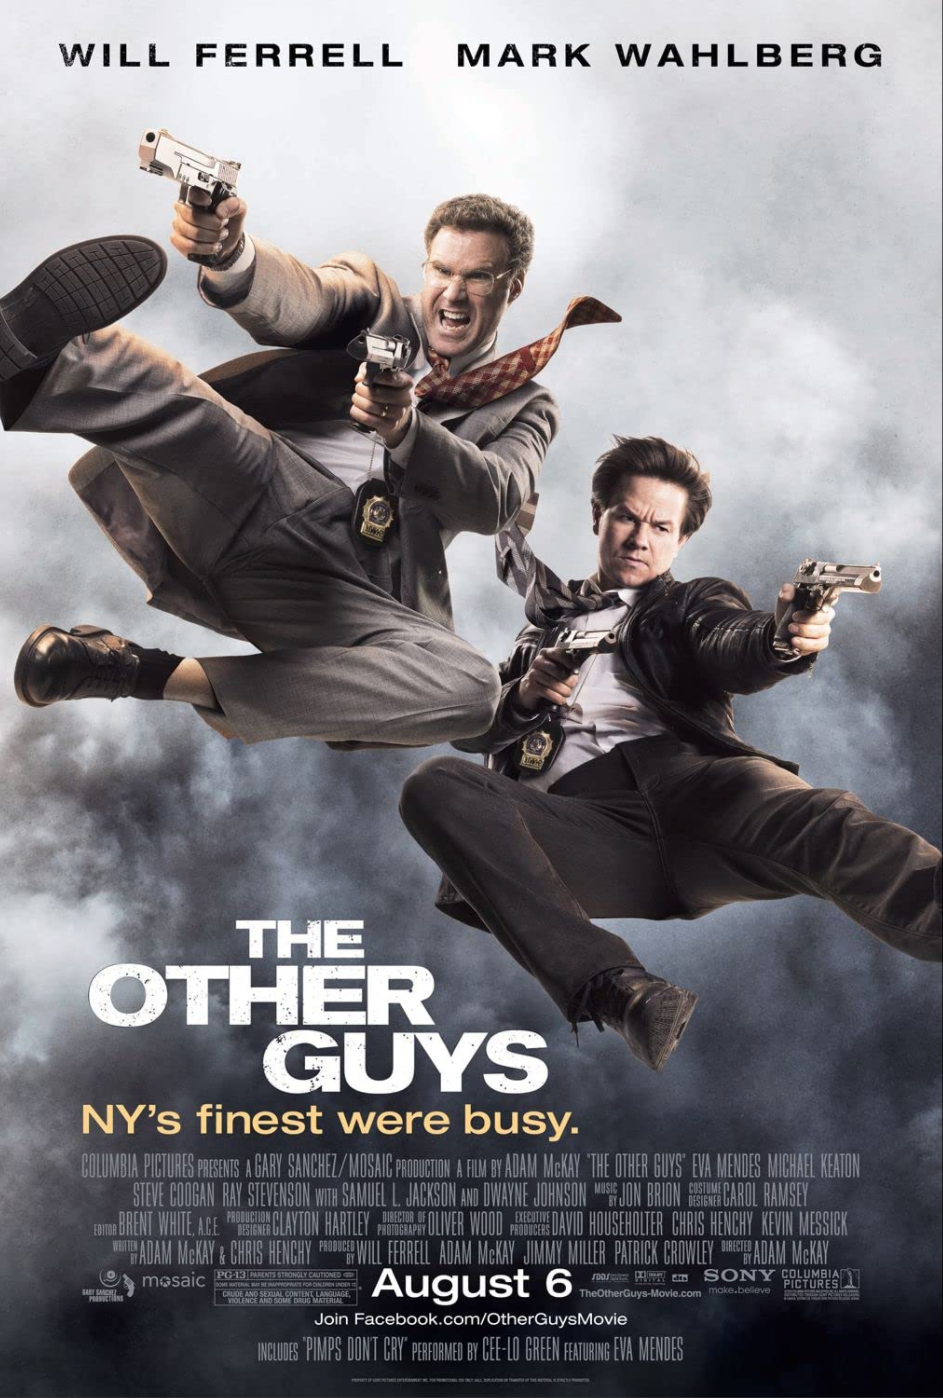  New York Aerial Cinematography the other guys movie 